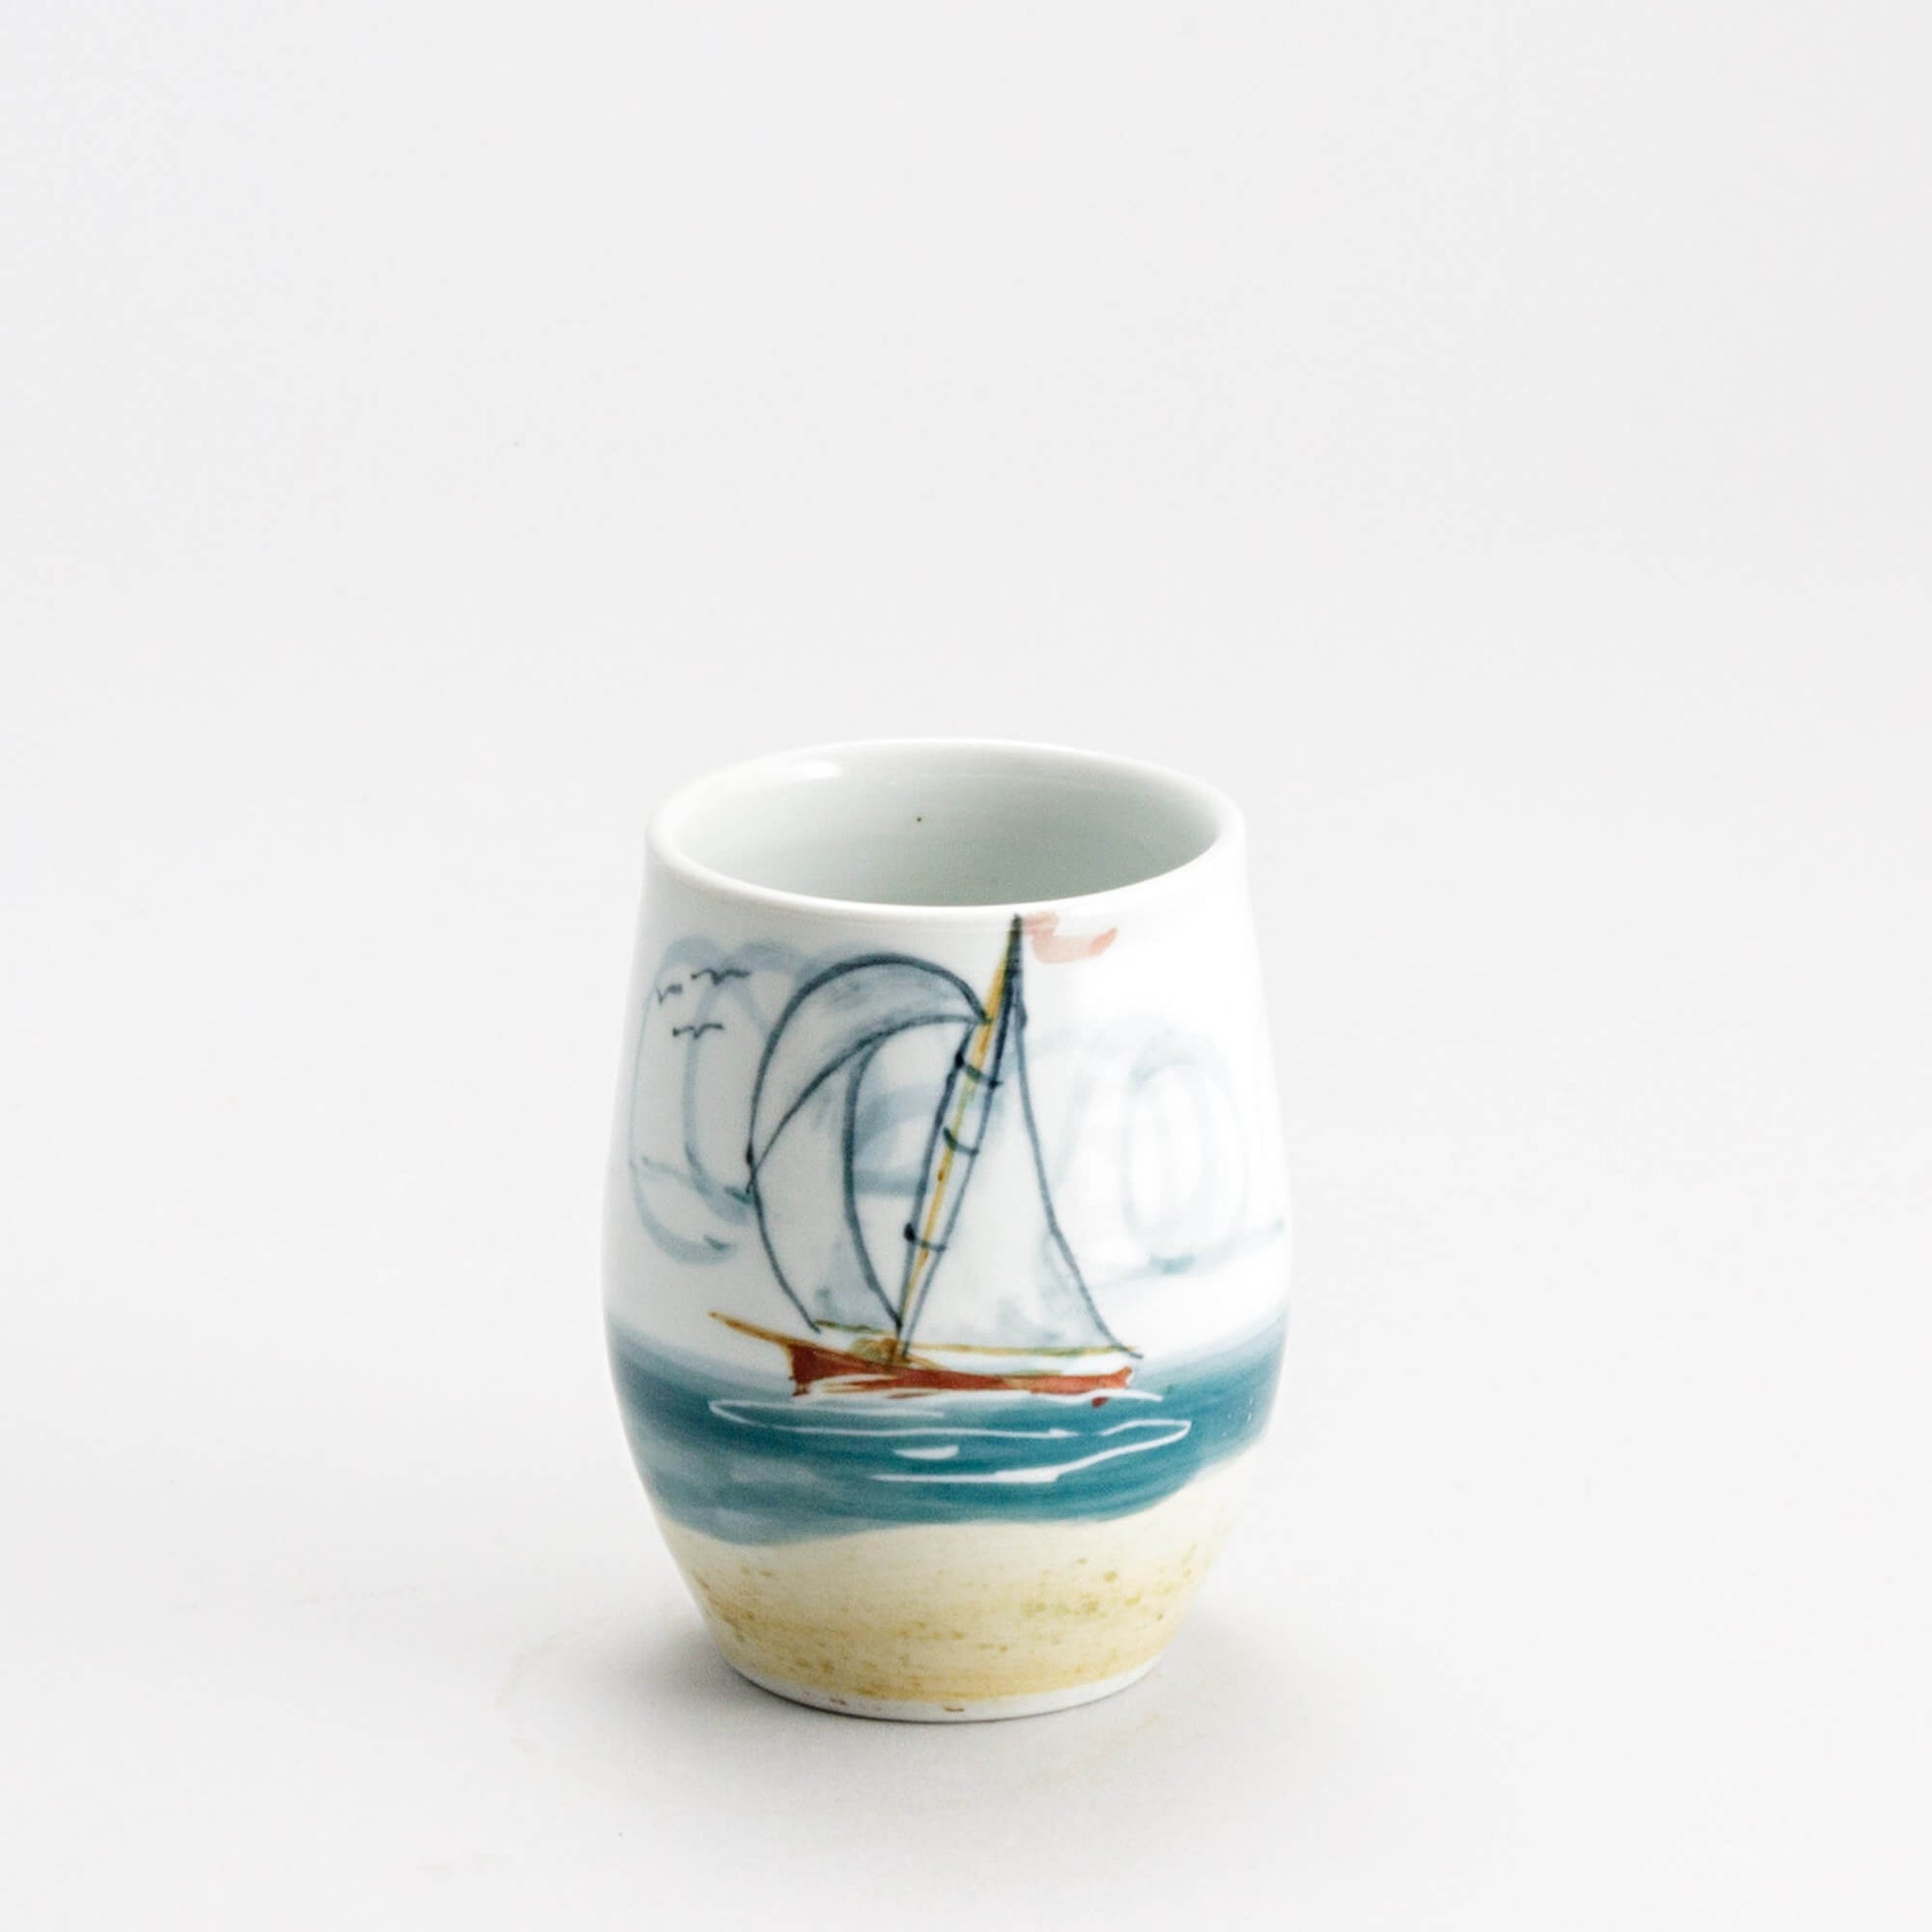 Handmade Pottery Stemless Wine Tumbler made by Georgetown Pottery in Maine Sailboat